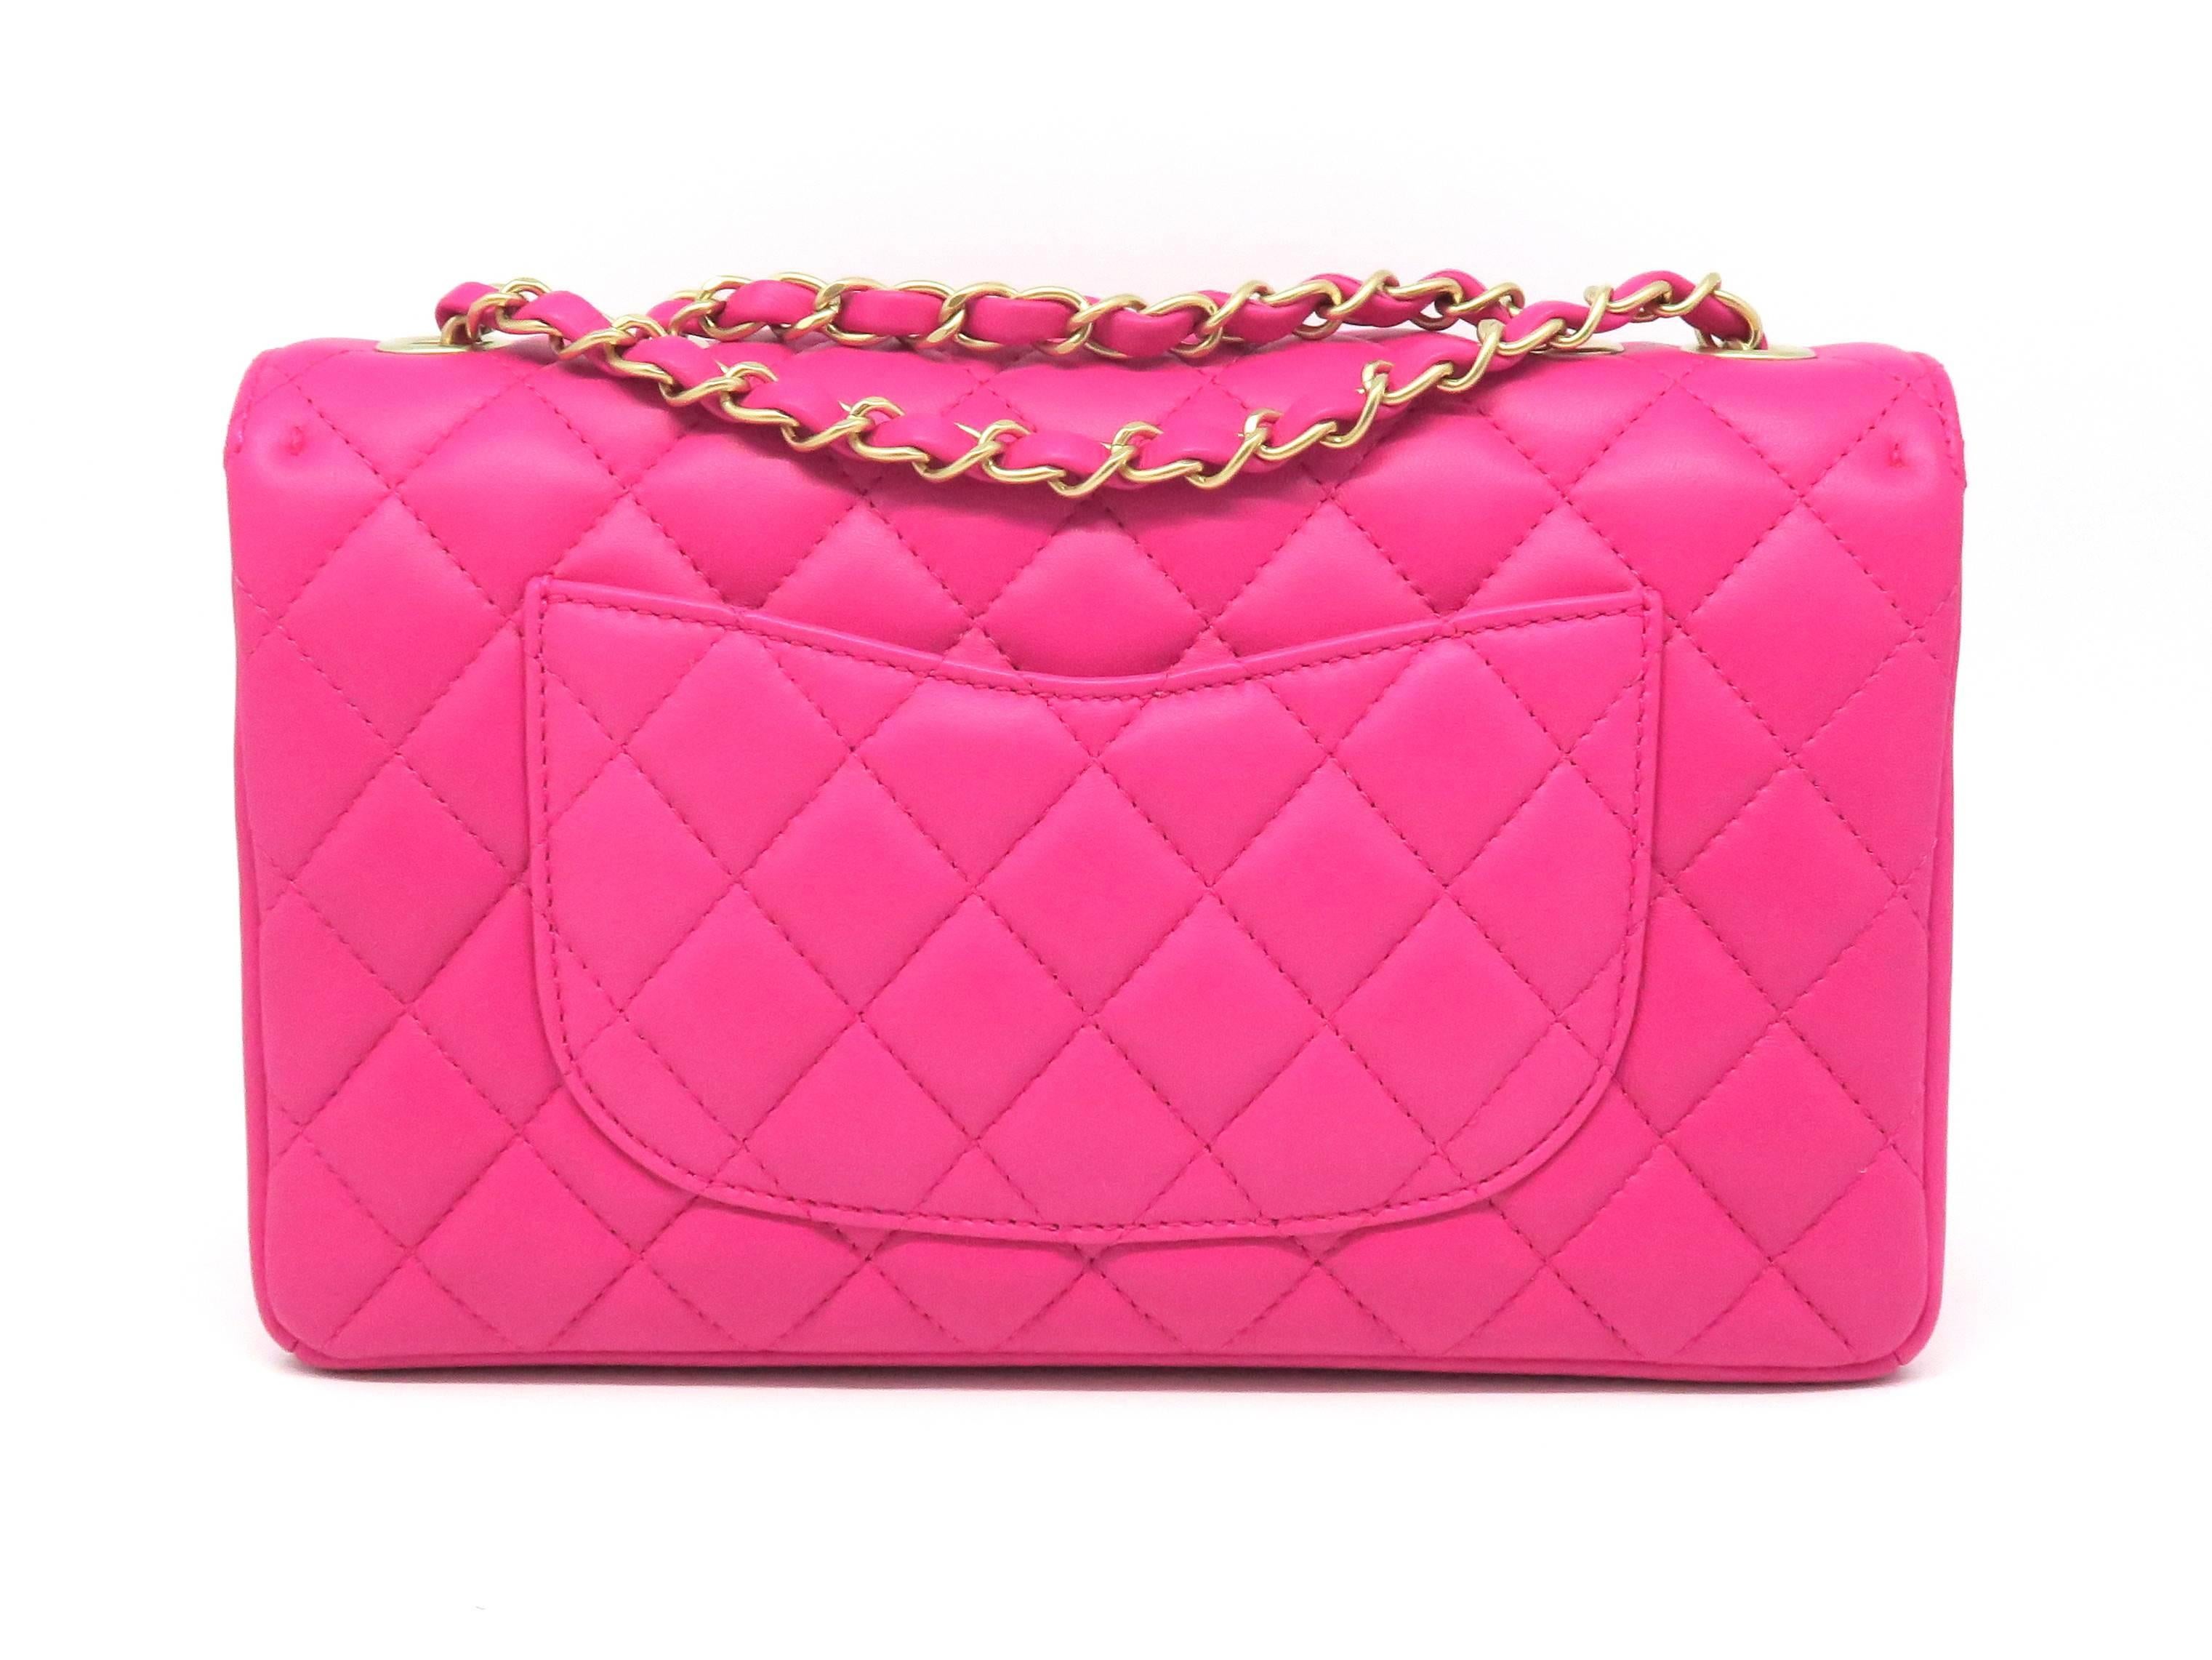 Pink Chanel Fuchsia Quilted Lambskin Leather Gold Metal Chain Shoulder Flap Bag